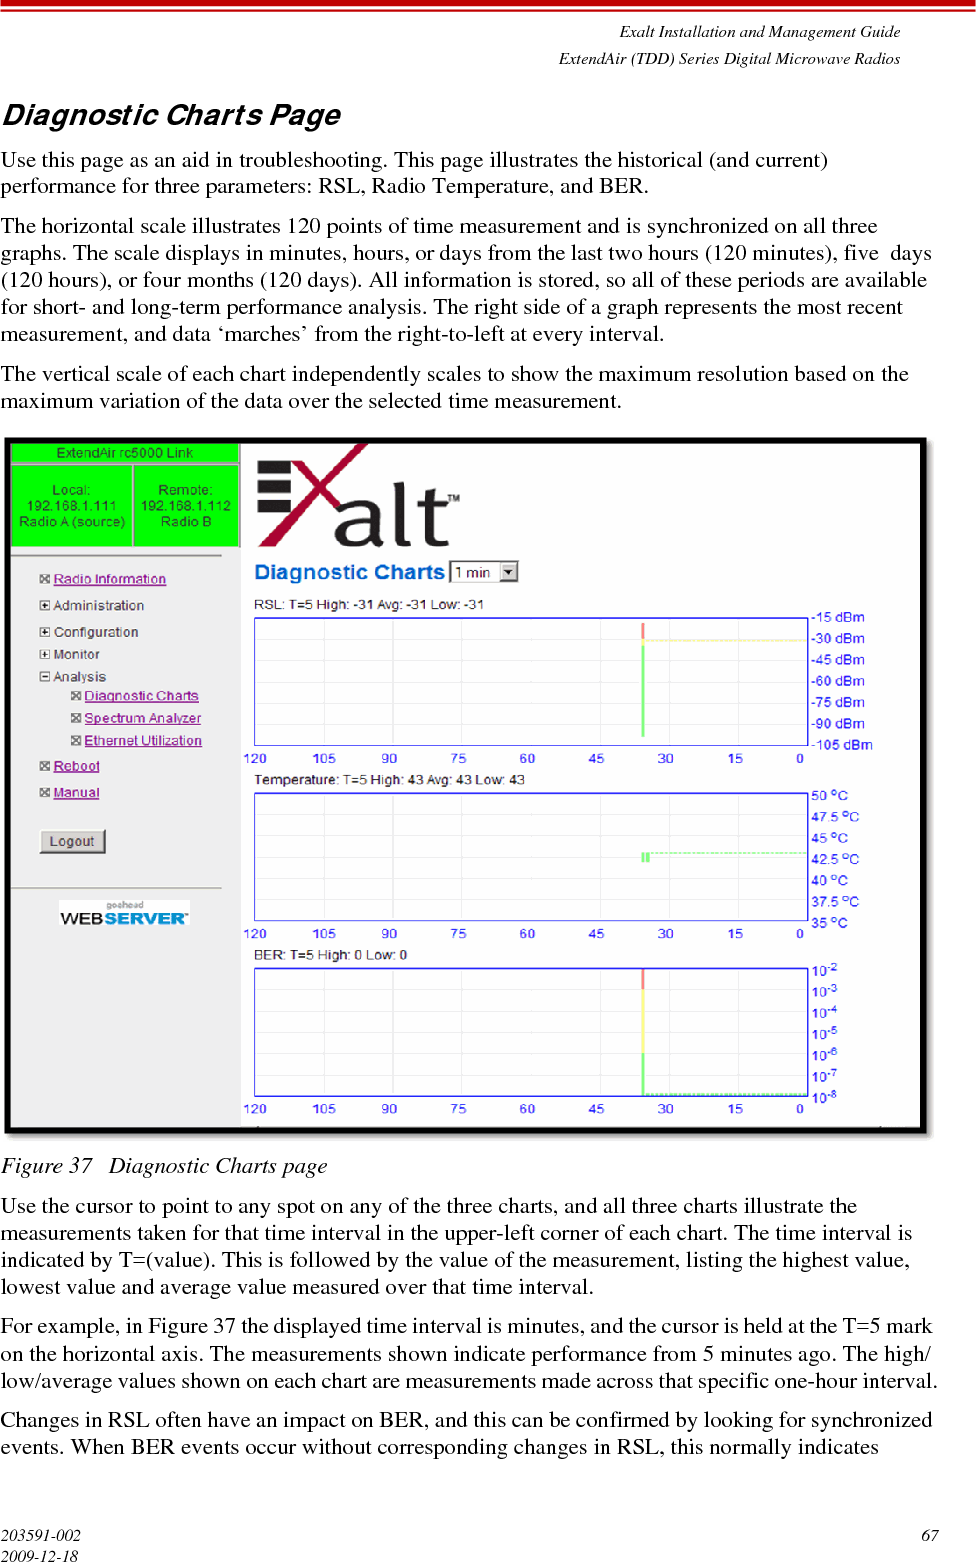 Exalt Installation and Management GuideExtendAir (TDD) Series Digital Microwave Radios203591-002 672009-12-18Diagnostic Charts PageUse this page as an aid in troubleshooting. This page illustrates the historical (and current) performance for three parameters: RSL, Radio Temperature, and BER.The horizontal scale illustrates 120 points of time measurement and is synchronized on all three graphs. The scale displays in minutes, hours, or days from the last two hours (120 minutes), five  days (120 hours), or four months (120 days). All information is stored, so all of these periods are available for short- and long-term performance analysis. The right side of a graph represents the most recent measurement, and data ‘marches’ from the right-to-left at every interval.The vertical scale of each chart independently scales to show the maximum resolution based on the maximum variation of the data over the selected time measurement. Figure 37   Diagnostic Charts pageUse the cursor to point to any spot on any of the three charts, and all three charts illustrate the measurements taken for that time interval in the upper-left corner of each chart. The time interval is indicated by T=(value). This is followed by the value of the measurement, listing the highest value, lowest value and average value measured over that time interval.For example, in Figure 37 the displayed time interval is minutes, and the cursor is held at the T=5 mark on the horizontal axis. The measurements shown indicate performance from 5 minutes ago. The high/low/average values shown on each chart are measurements made across that specific one-hour interval.Changes in RSL often have an impact on BER, and this can be confirmed by looking for synchronized events. When BER events occur without corresponding changes in RSL, this normally indicates 